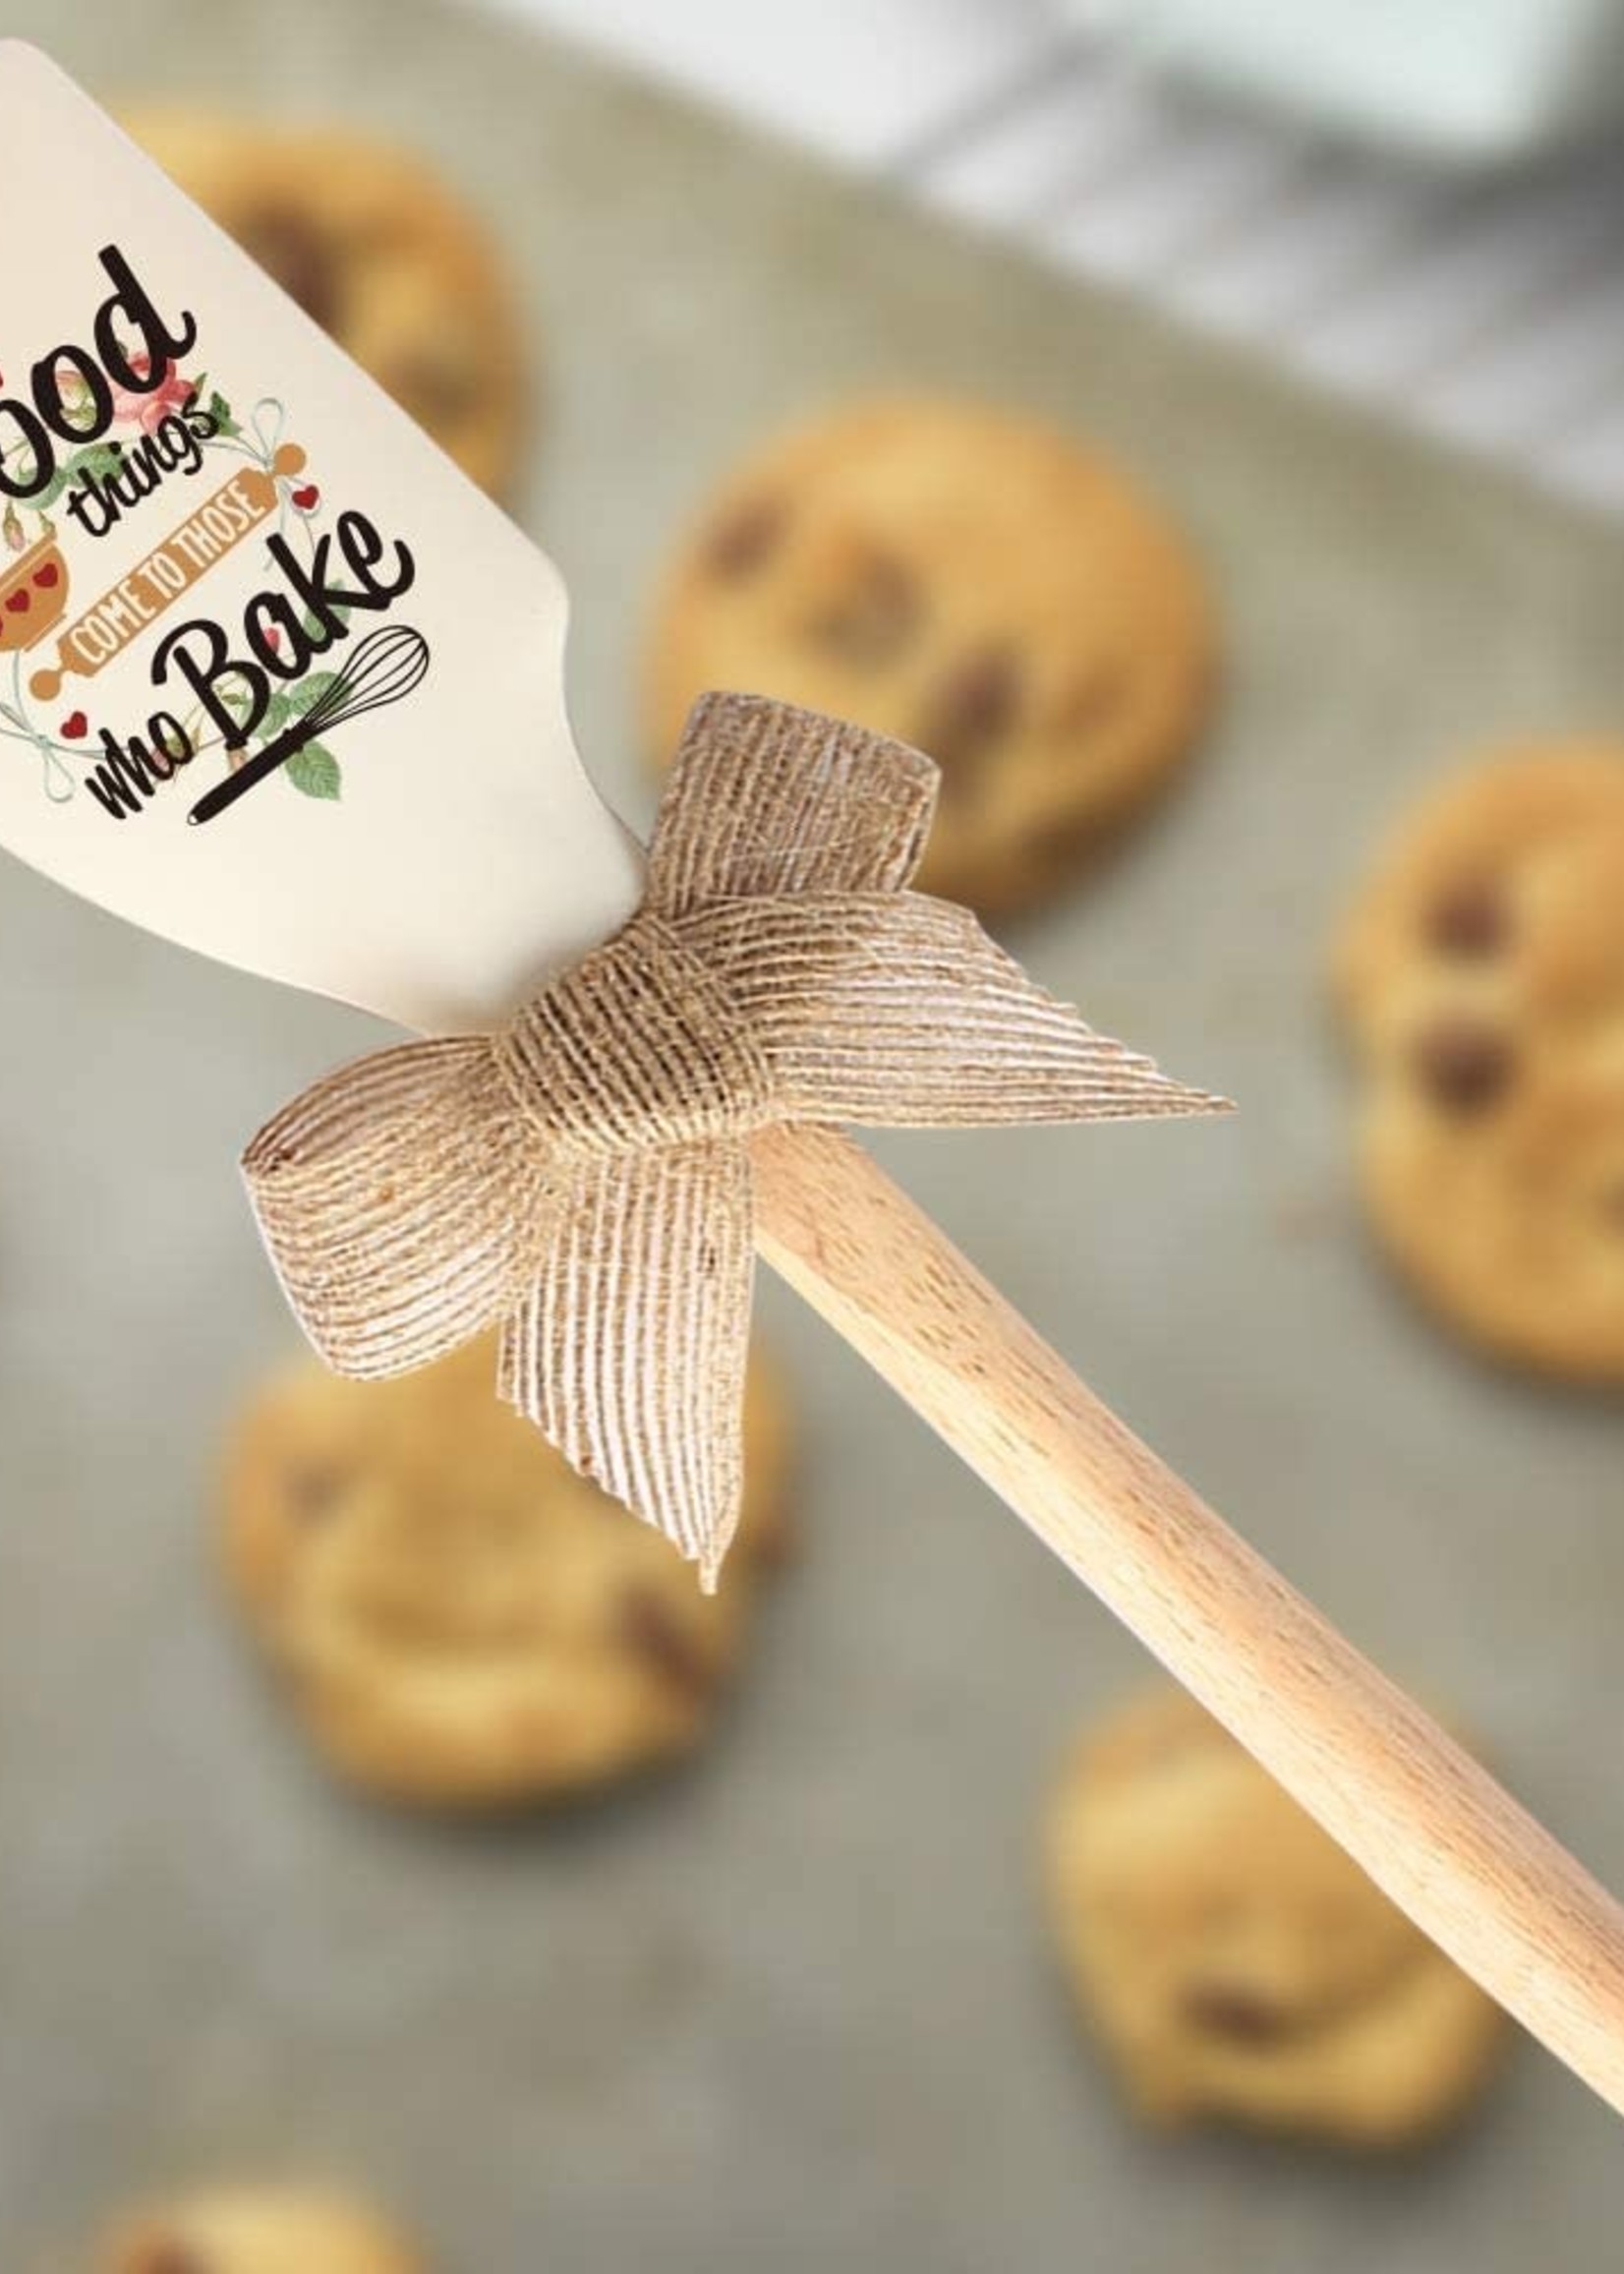 Sweet Roots Cakery Kitchen Spatula (Good things )